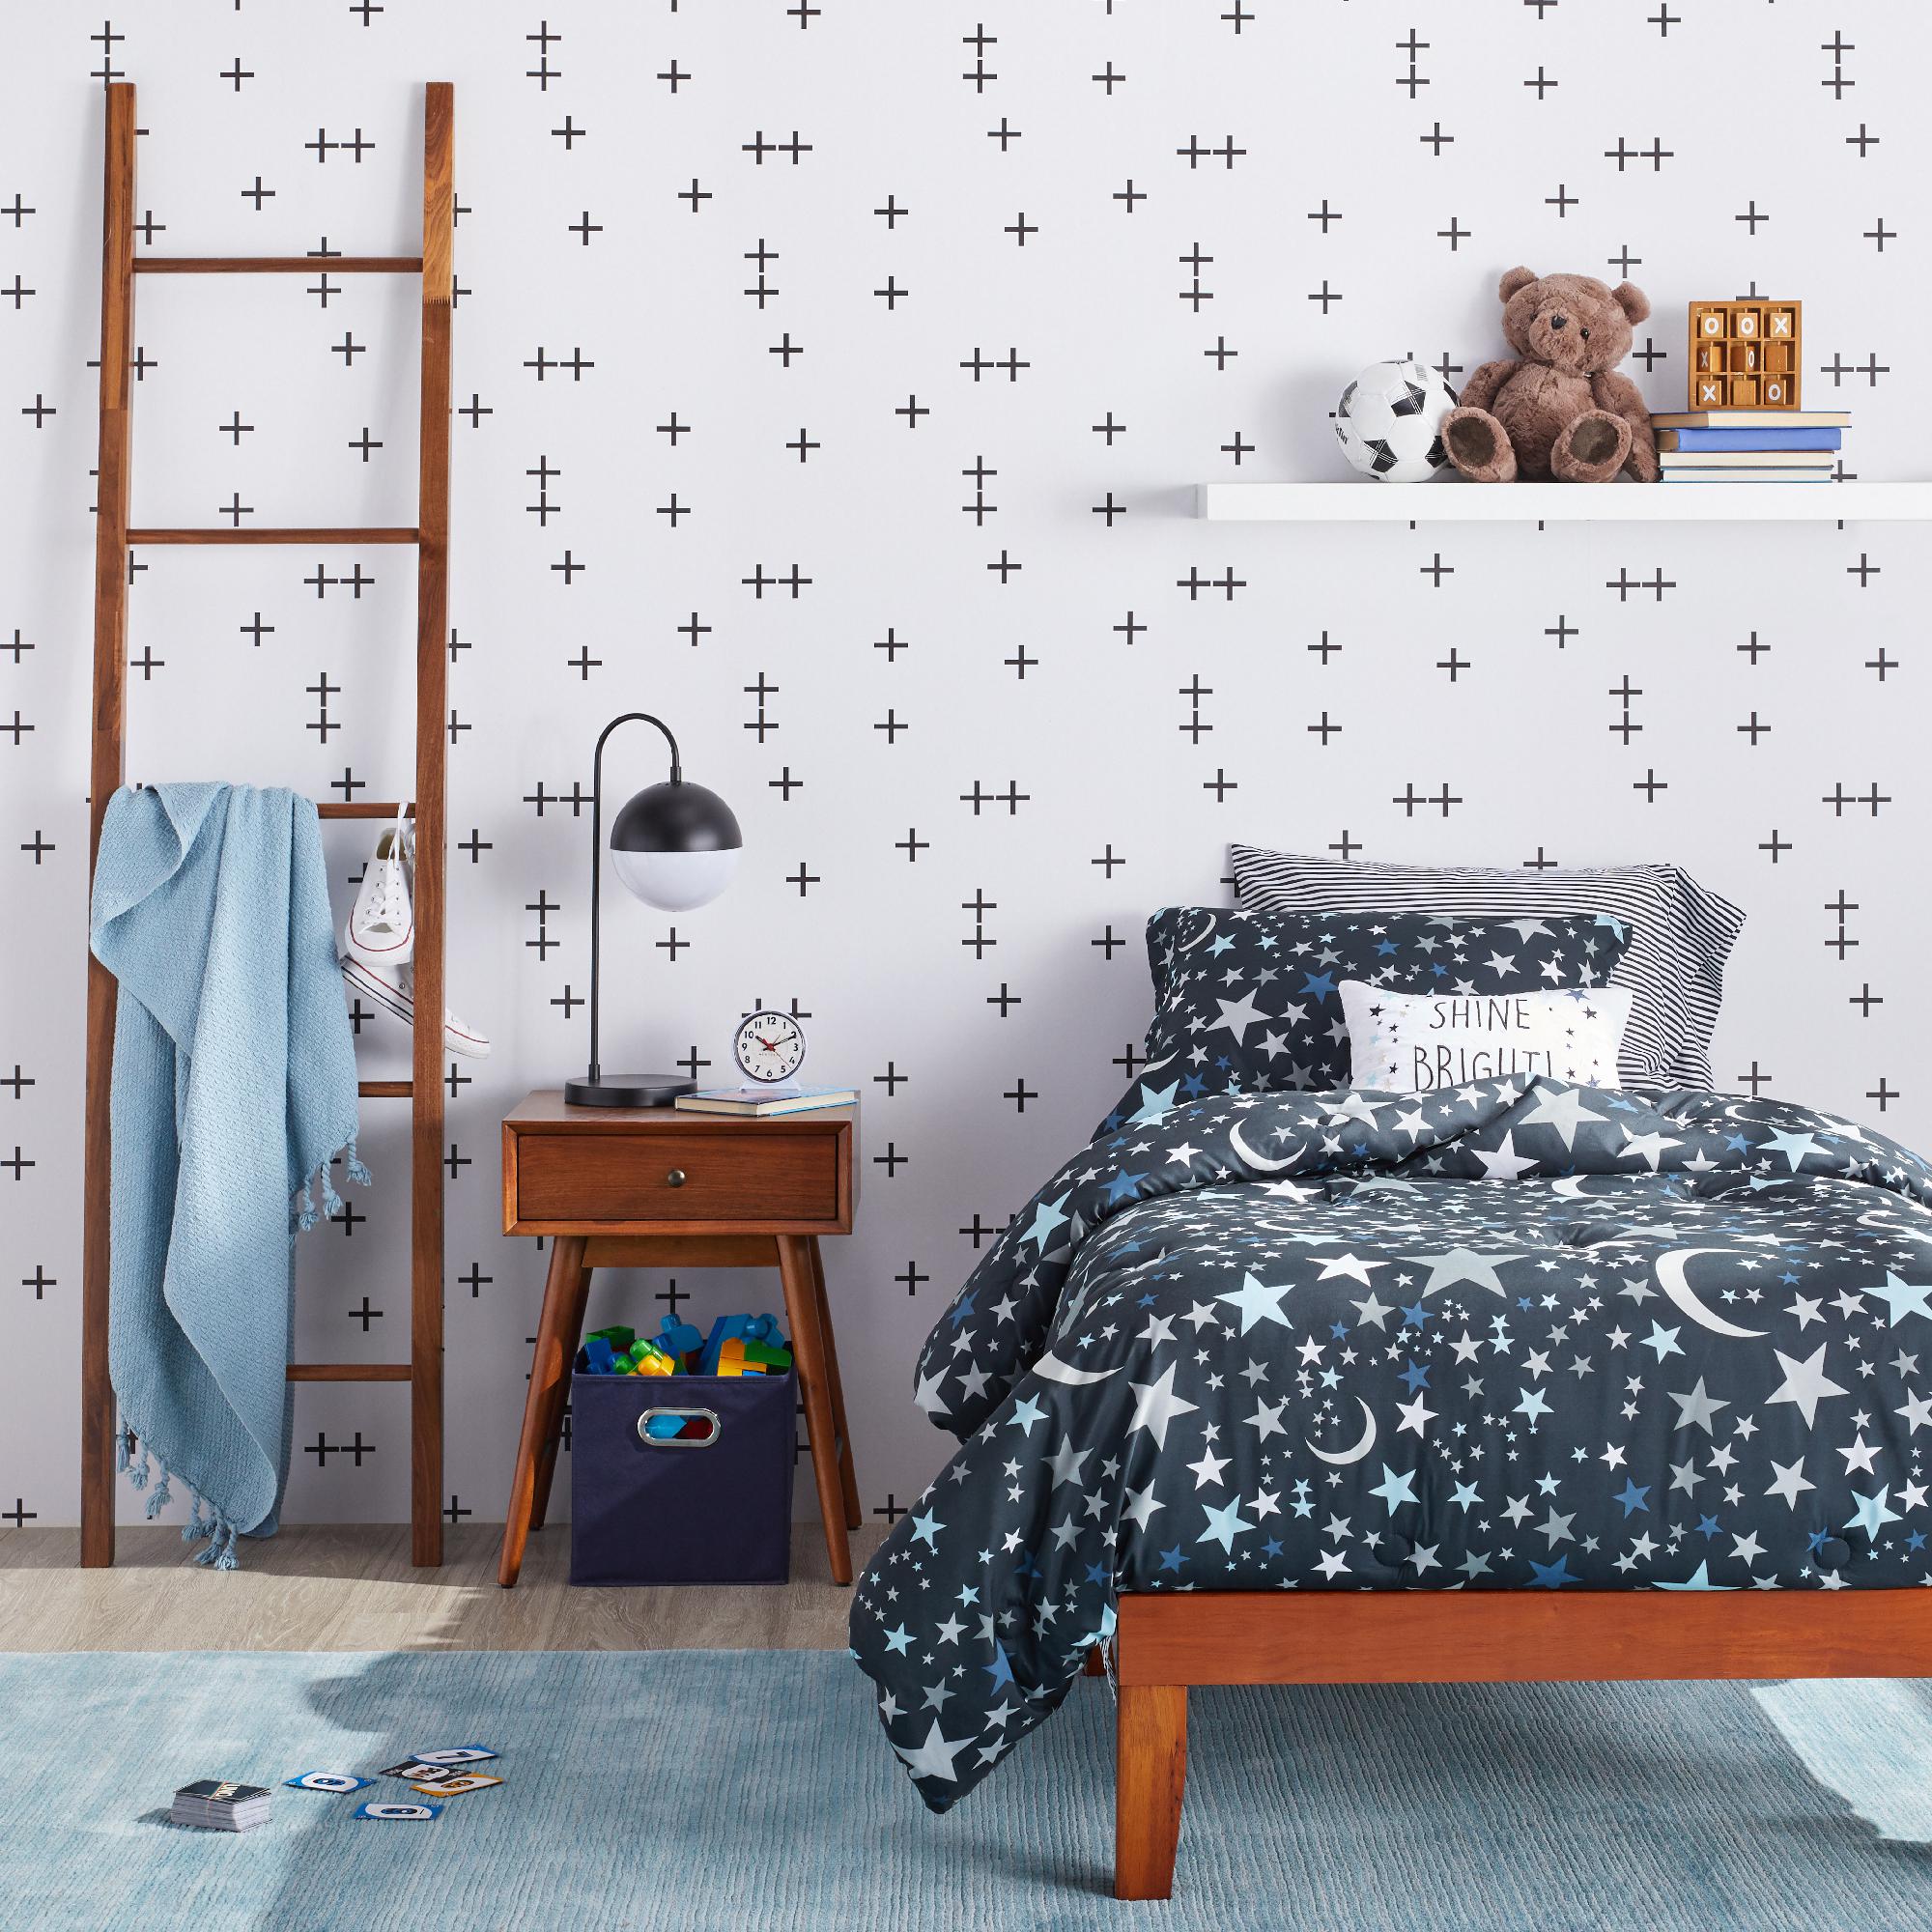 save an extra 10% on Select Kids' Furniture*